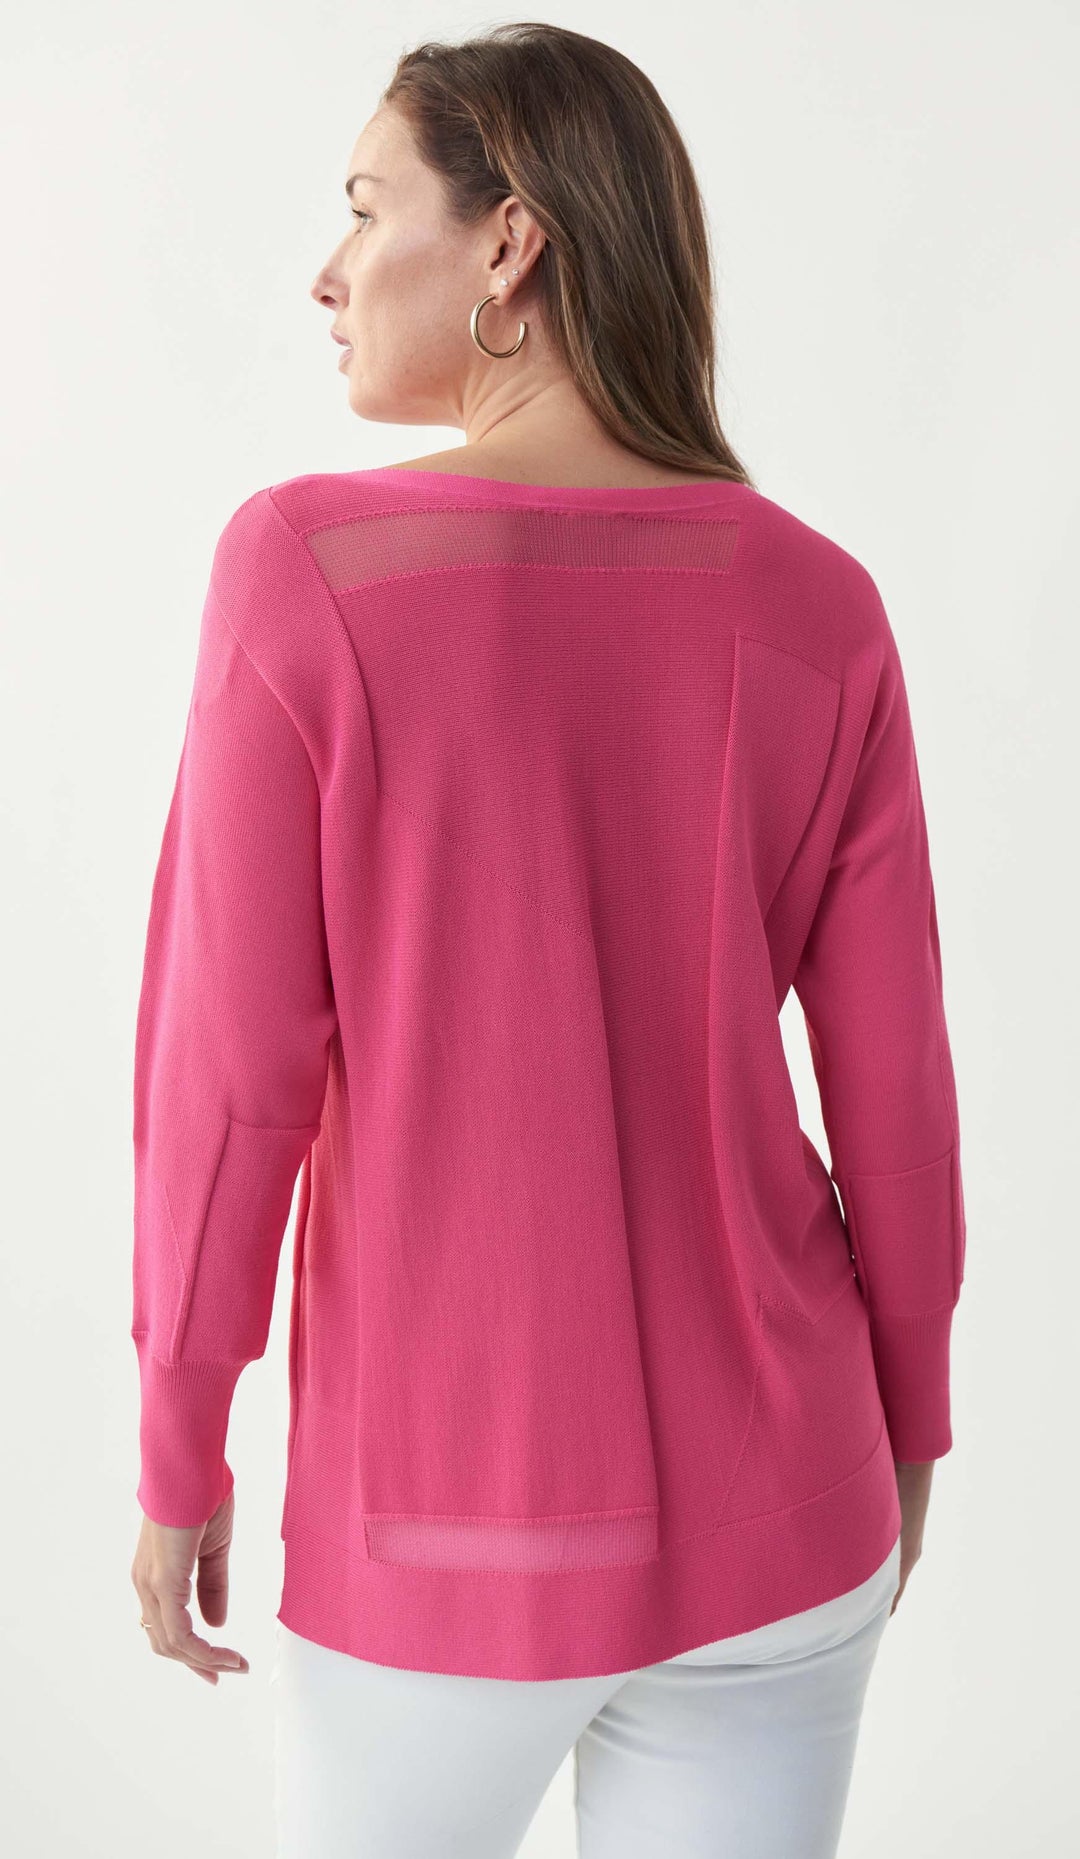 Joseph Ribkoff Raspberry Sorbet Cut-Out Knit Top Style 221909 - Knitwear, New, Raspberry Sorbet, SS22, Top ginasmartboutique